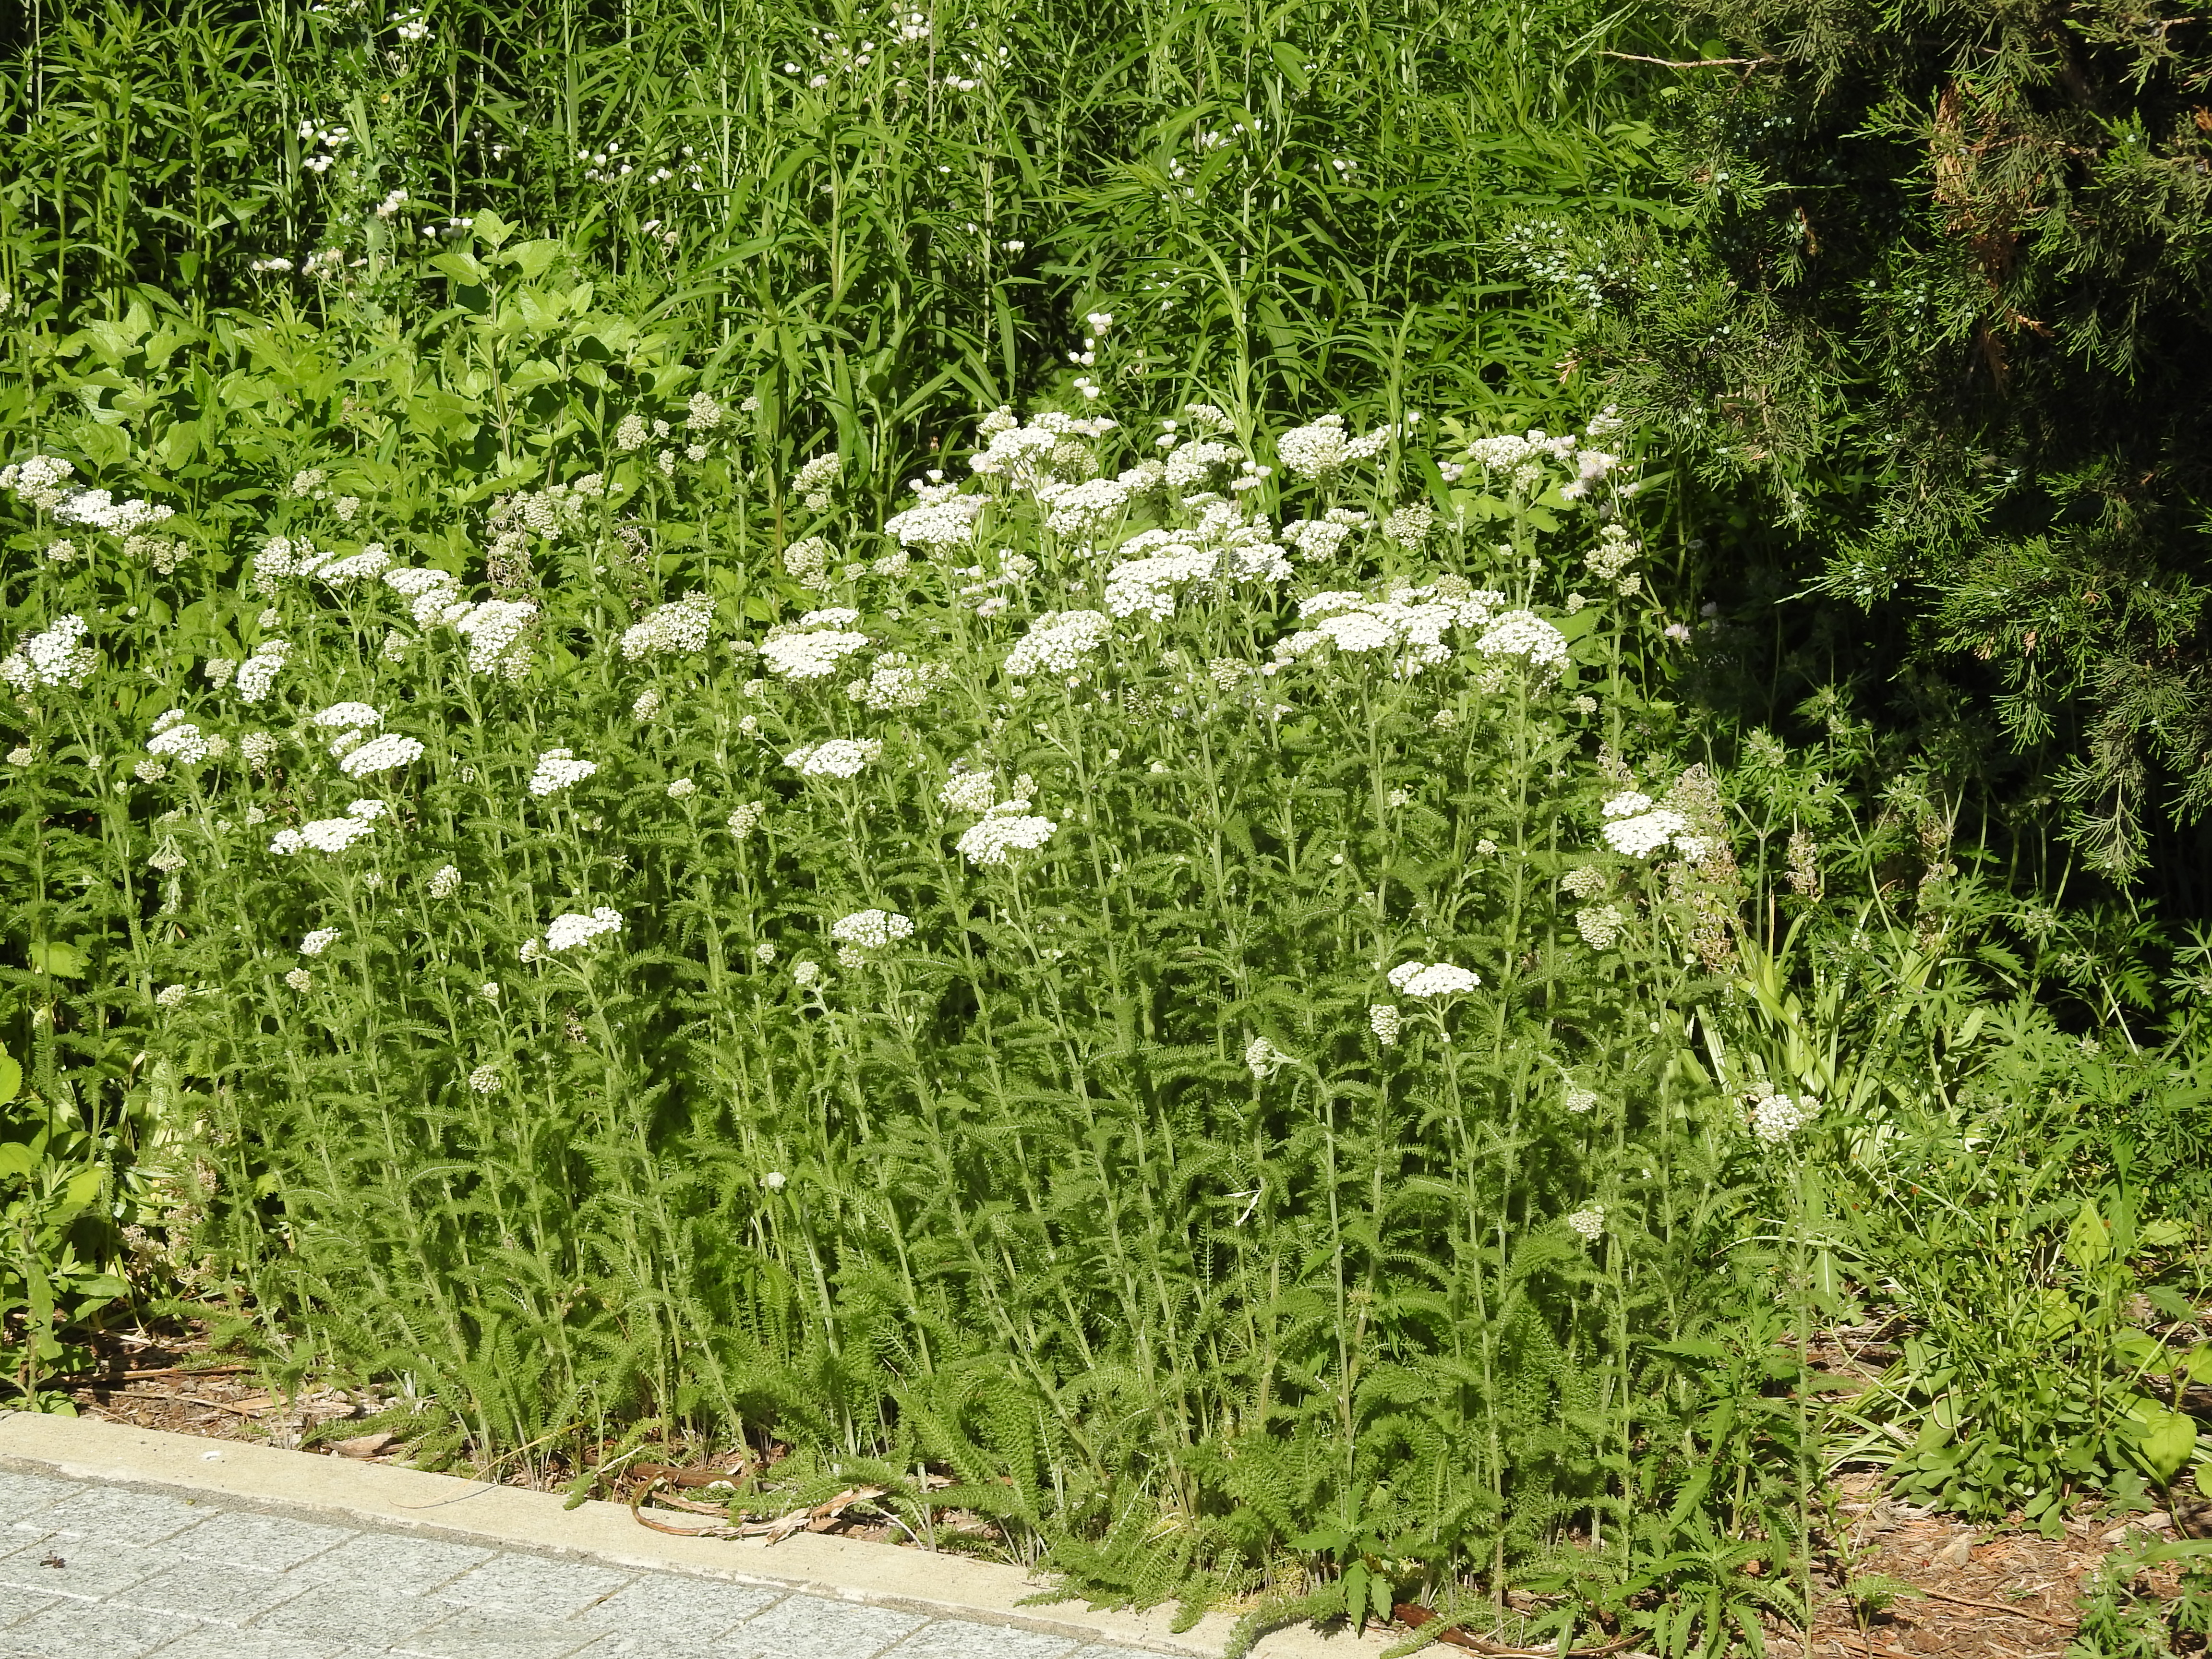 A far-away shot of several tightly grouped tall green plants with white flowers on top.